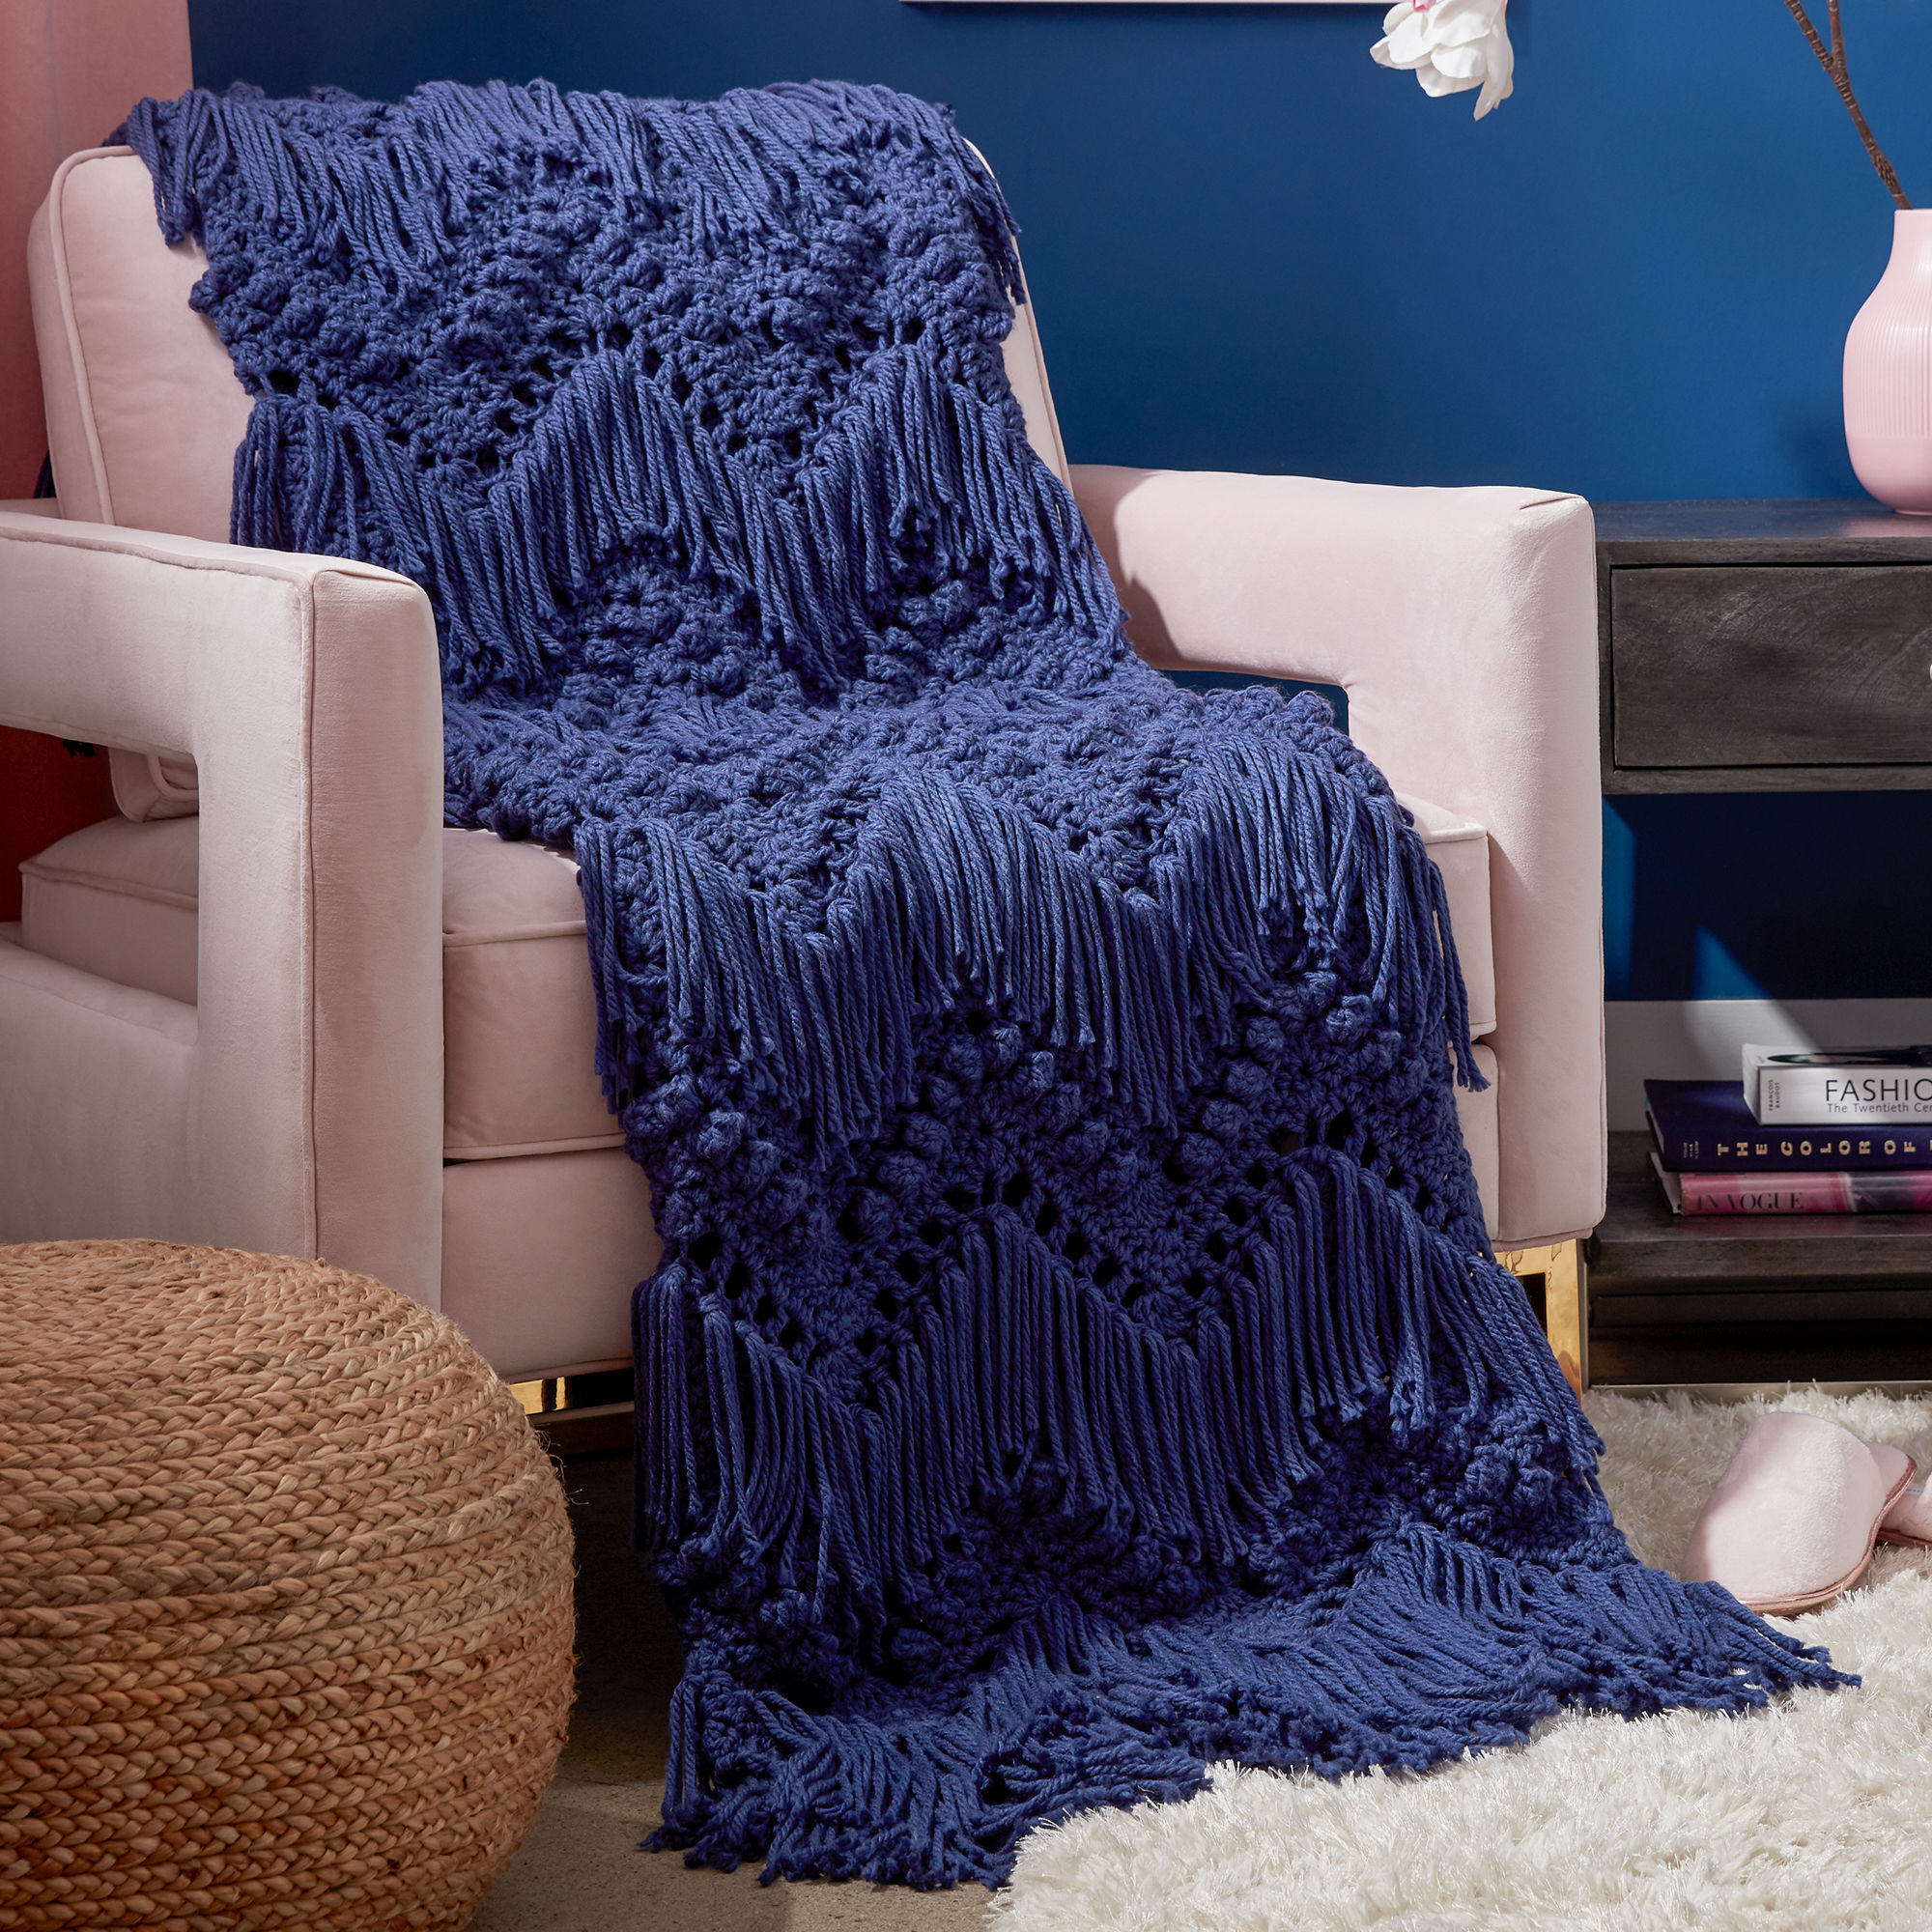 The classic crochet chevron motif gets a new look with bobbles and fringe